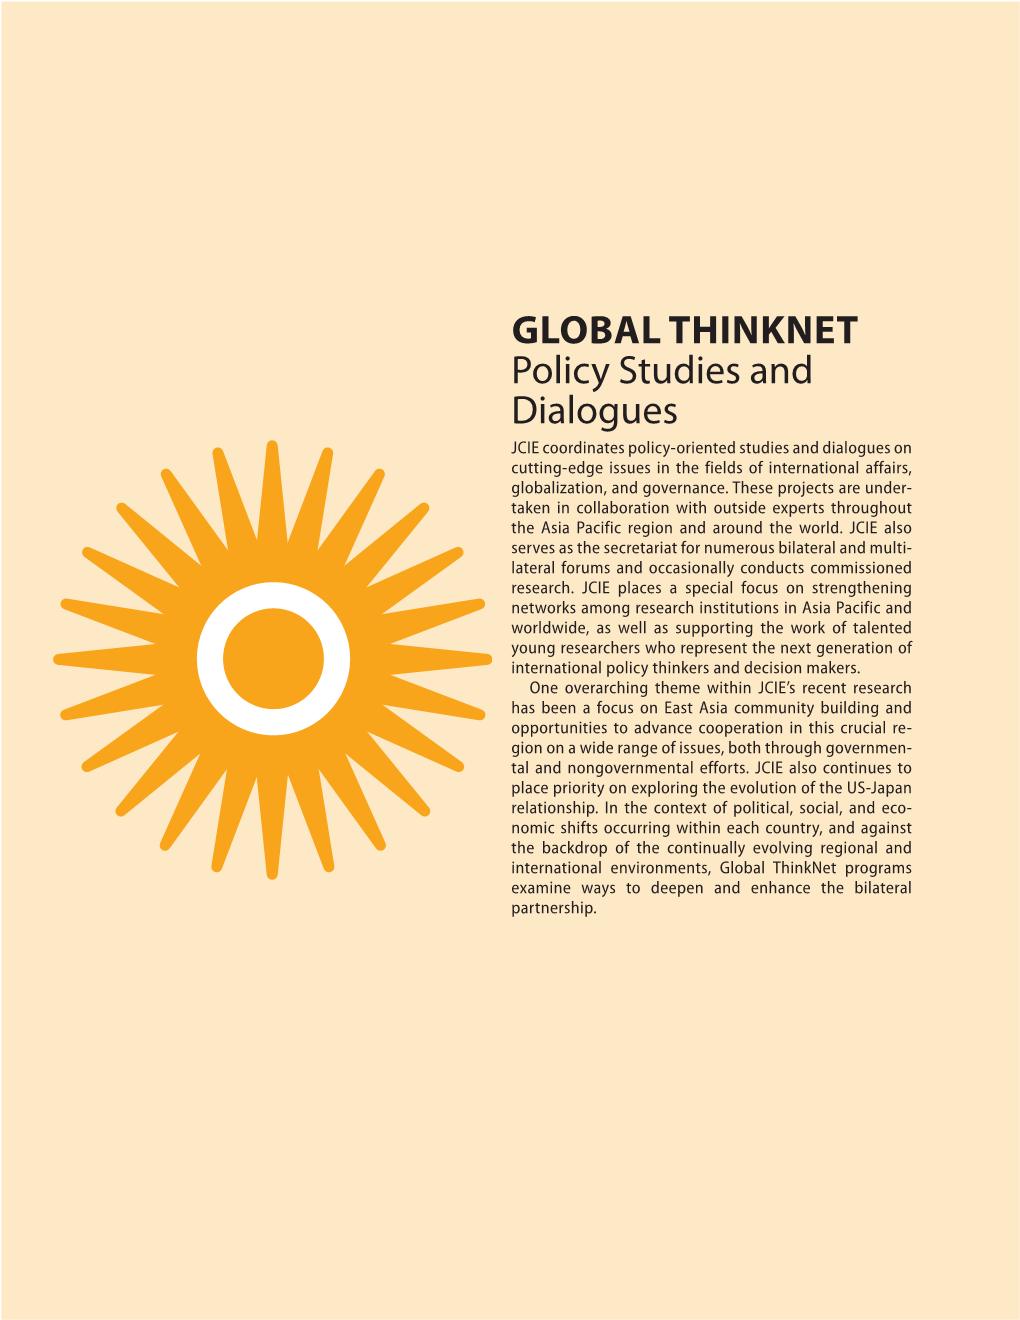 GLOBAL THINKNET Policy Studies and Dialogues